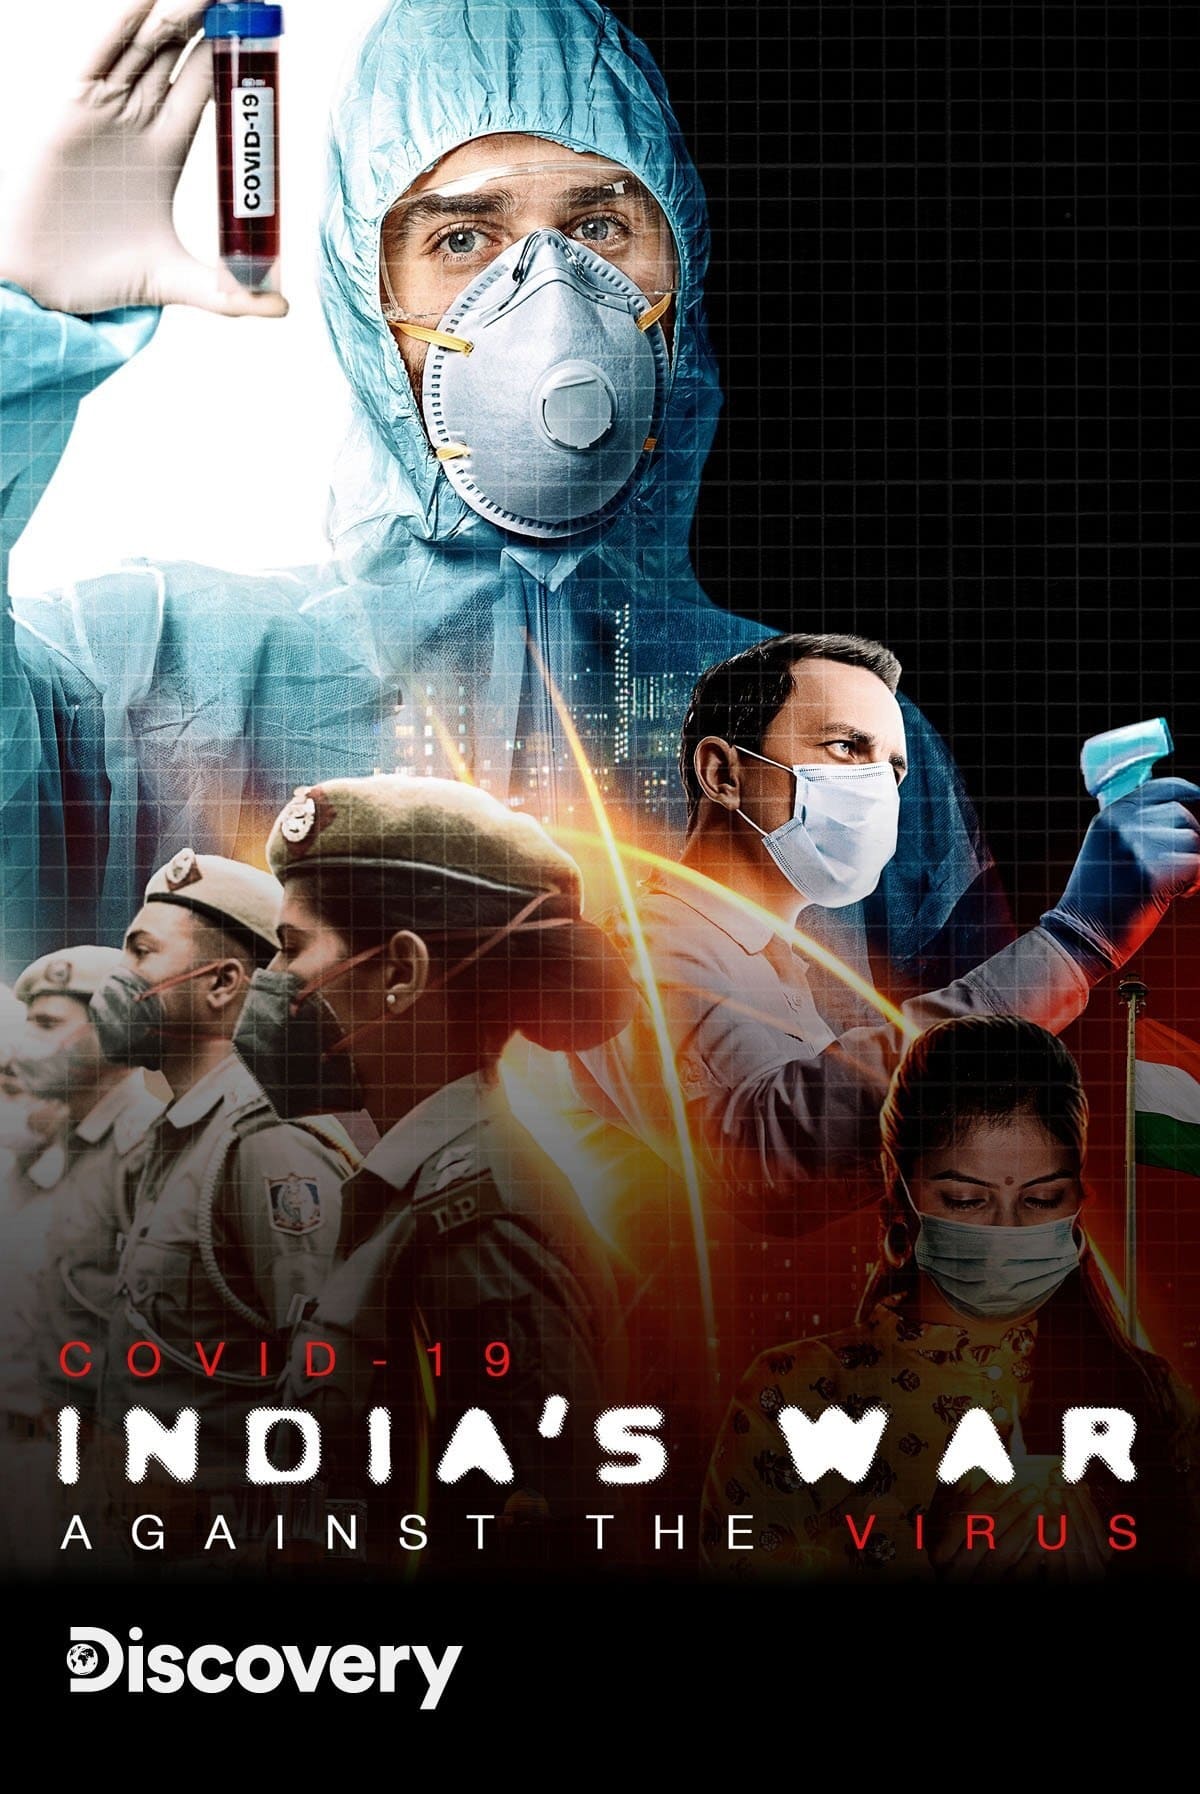 TV ratings for COVID-19: India's War Against The Virus in South Africa. Discovery+ TV series